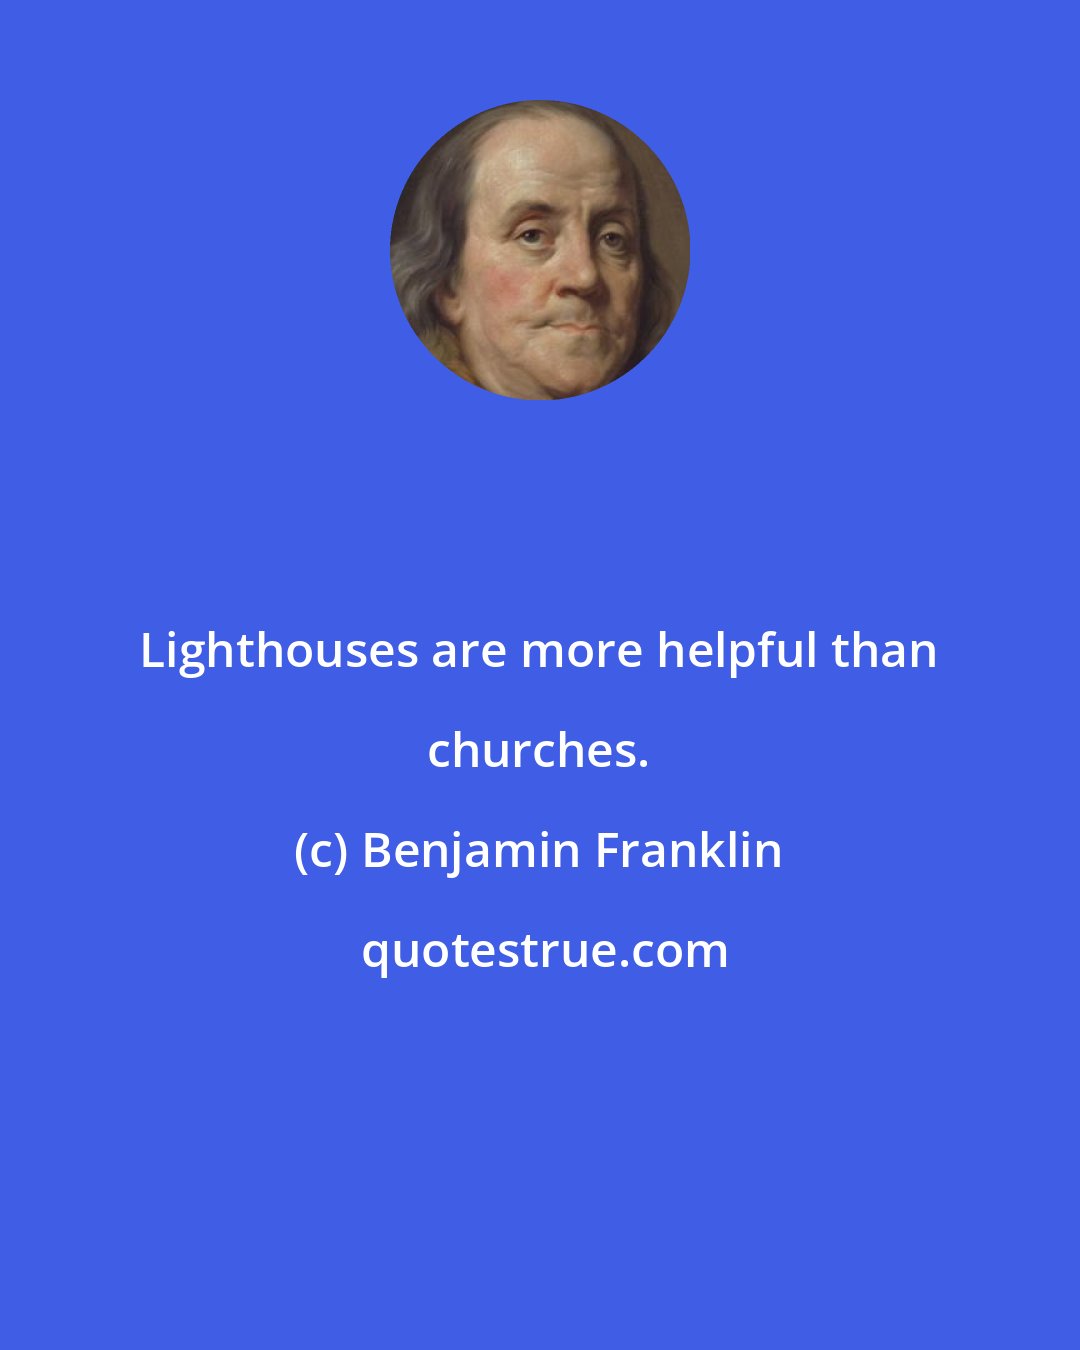 Benjamin Franklin: Lighthouses are more helpful than churches.